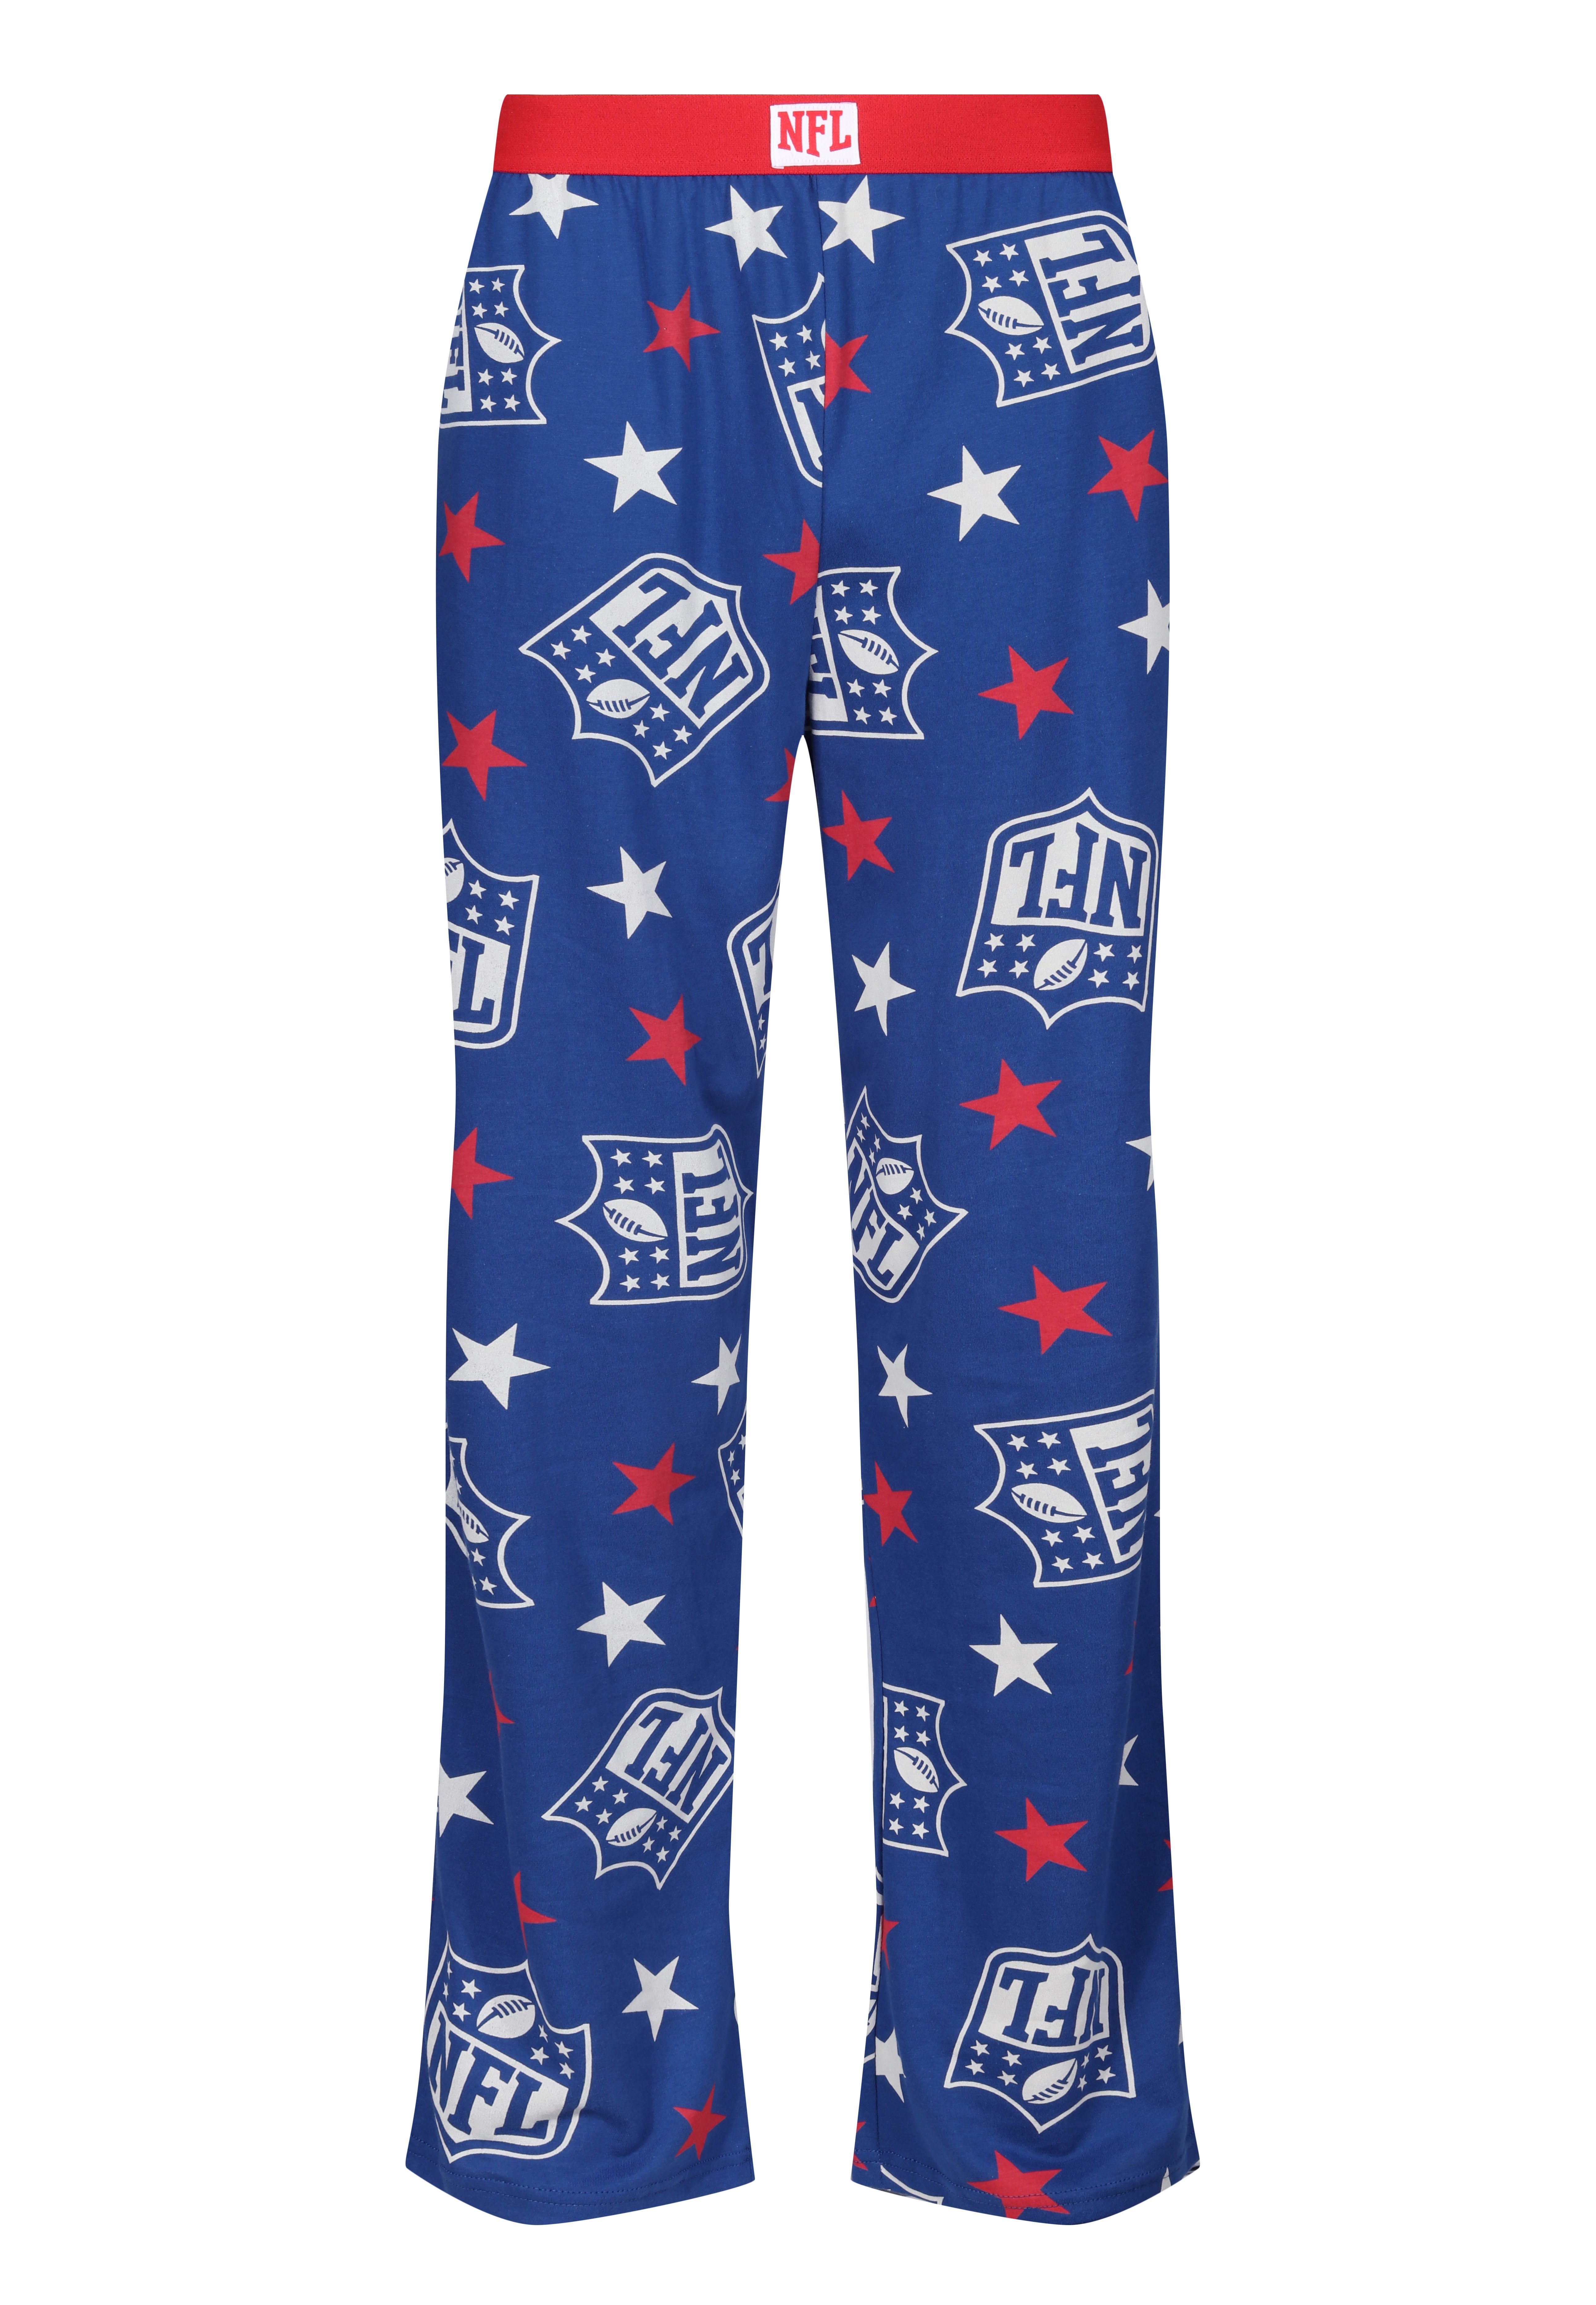 and Navy Loungepants Shield Loungepants NFL Recovered Stars